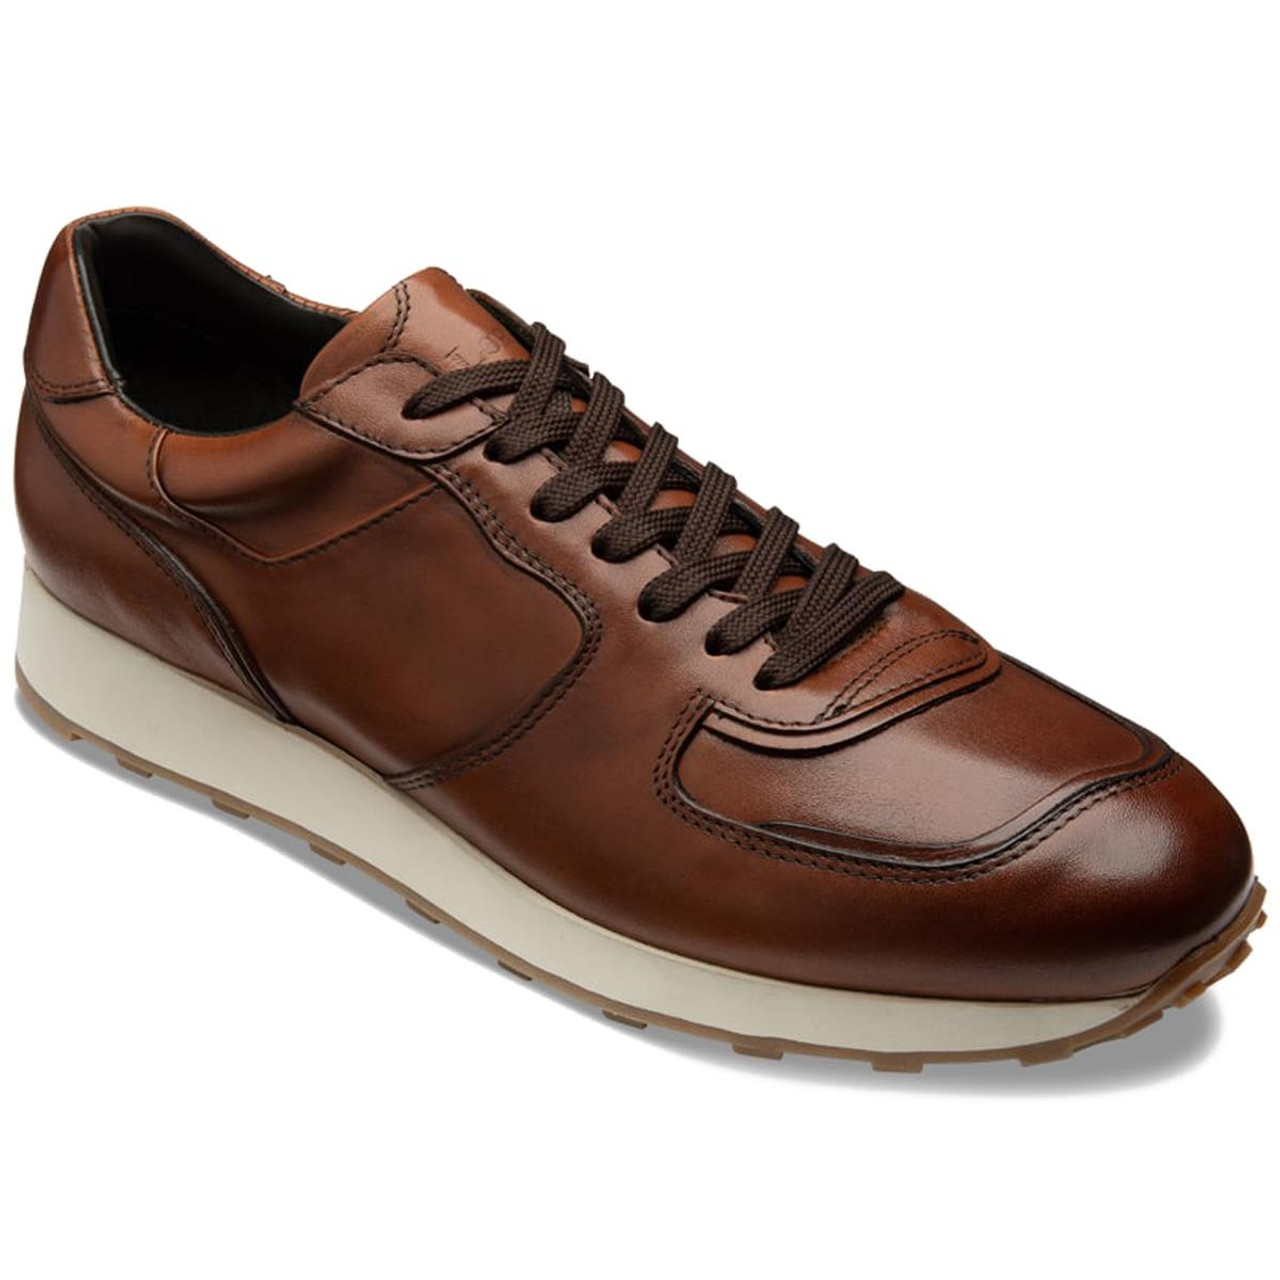 What type of soles do the Loake trainers feature?